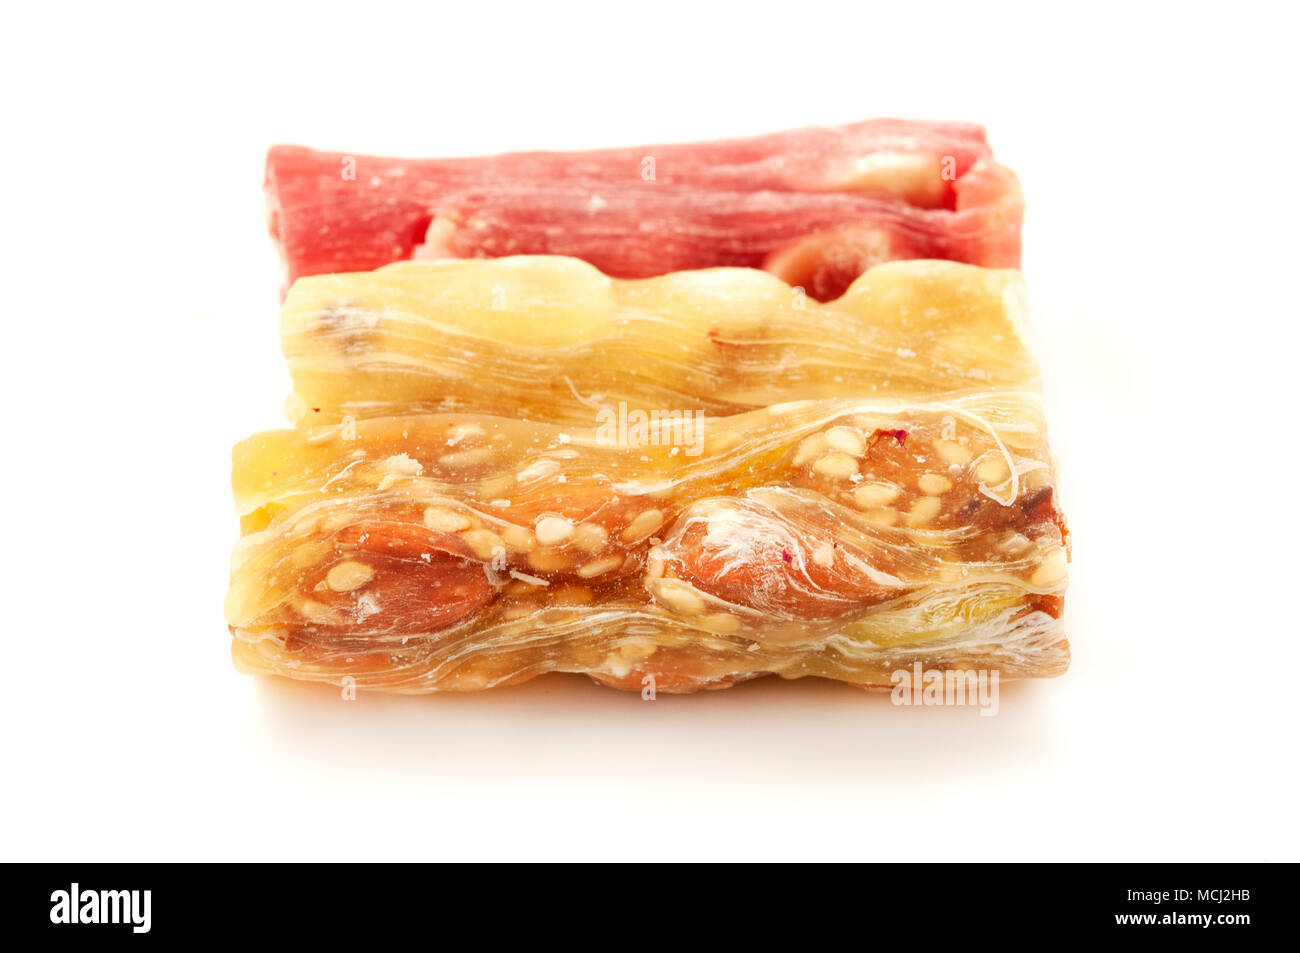 Turkish delight on a white background Stock Photo